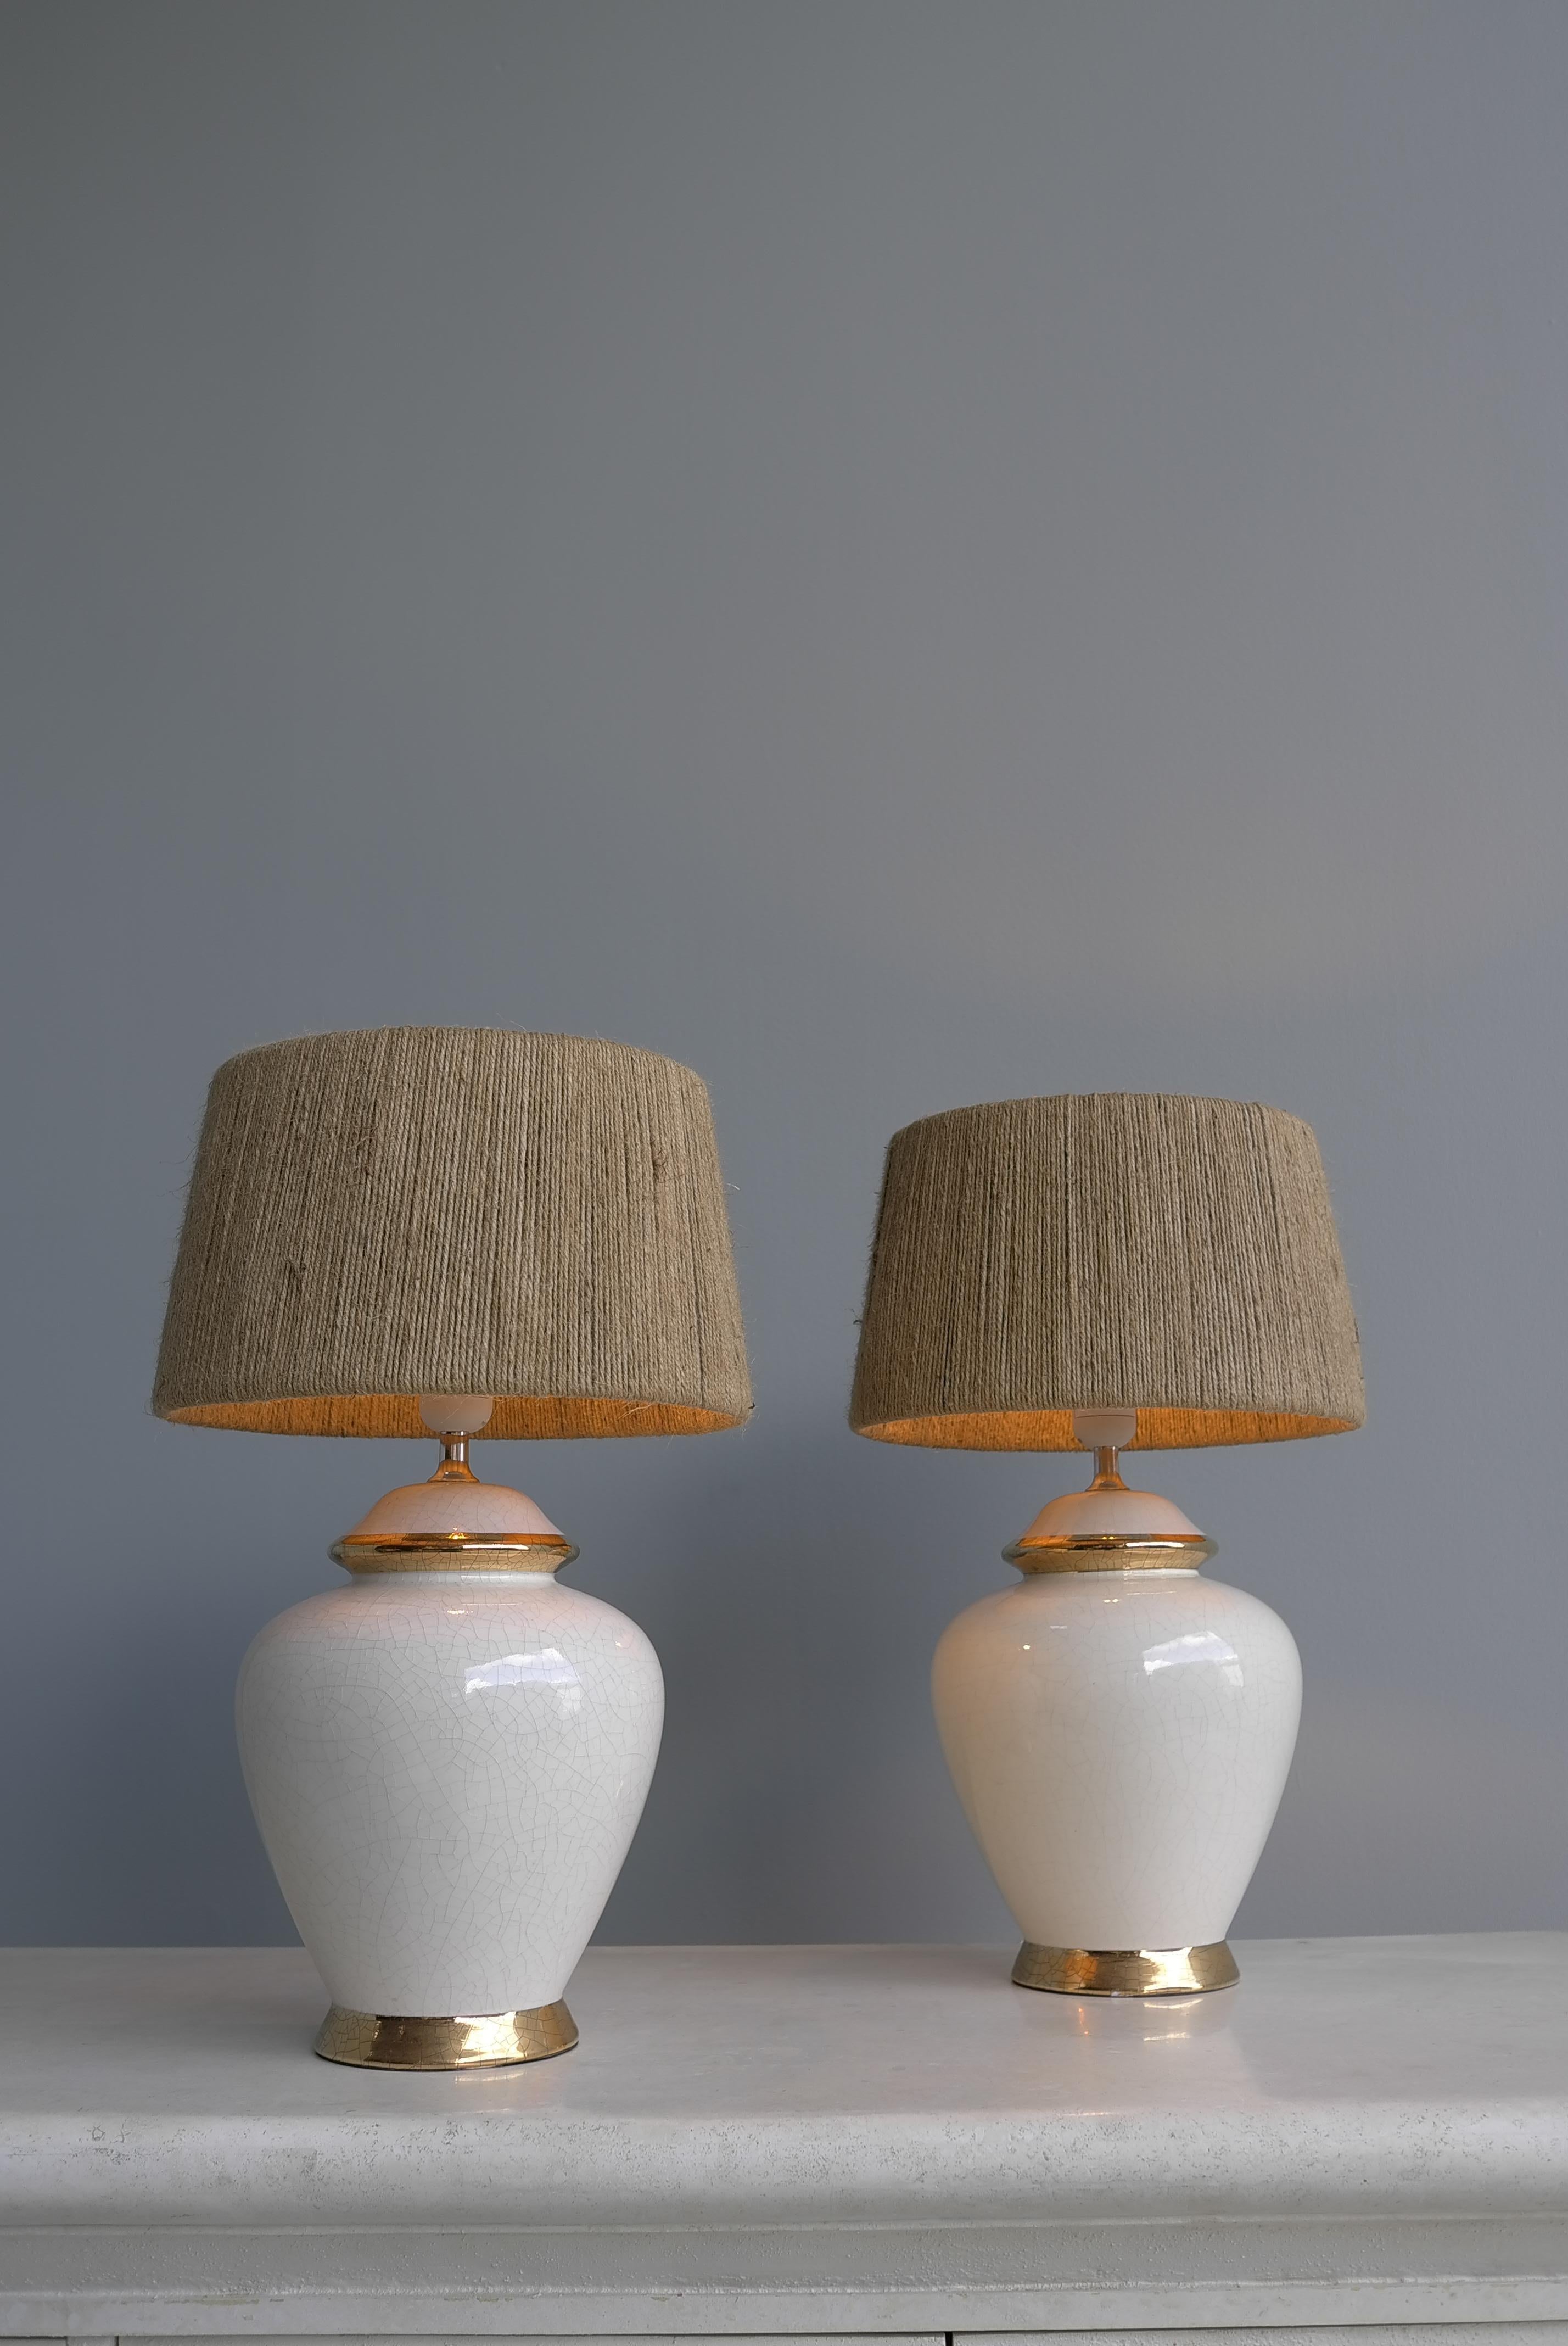 Pair of White and Gold Craquelure Glaze Ceramic French Lamps with rope shades France circa 1975